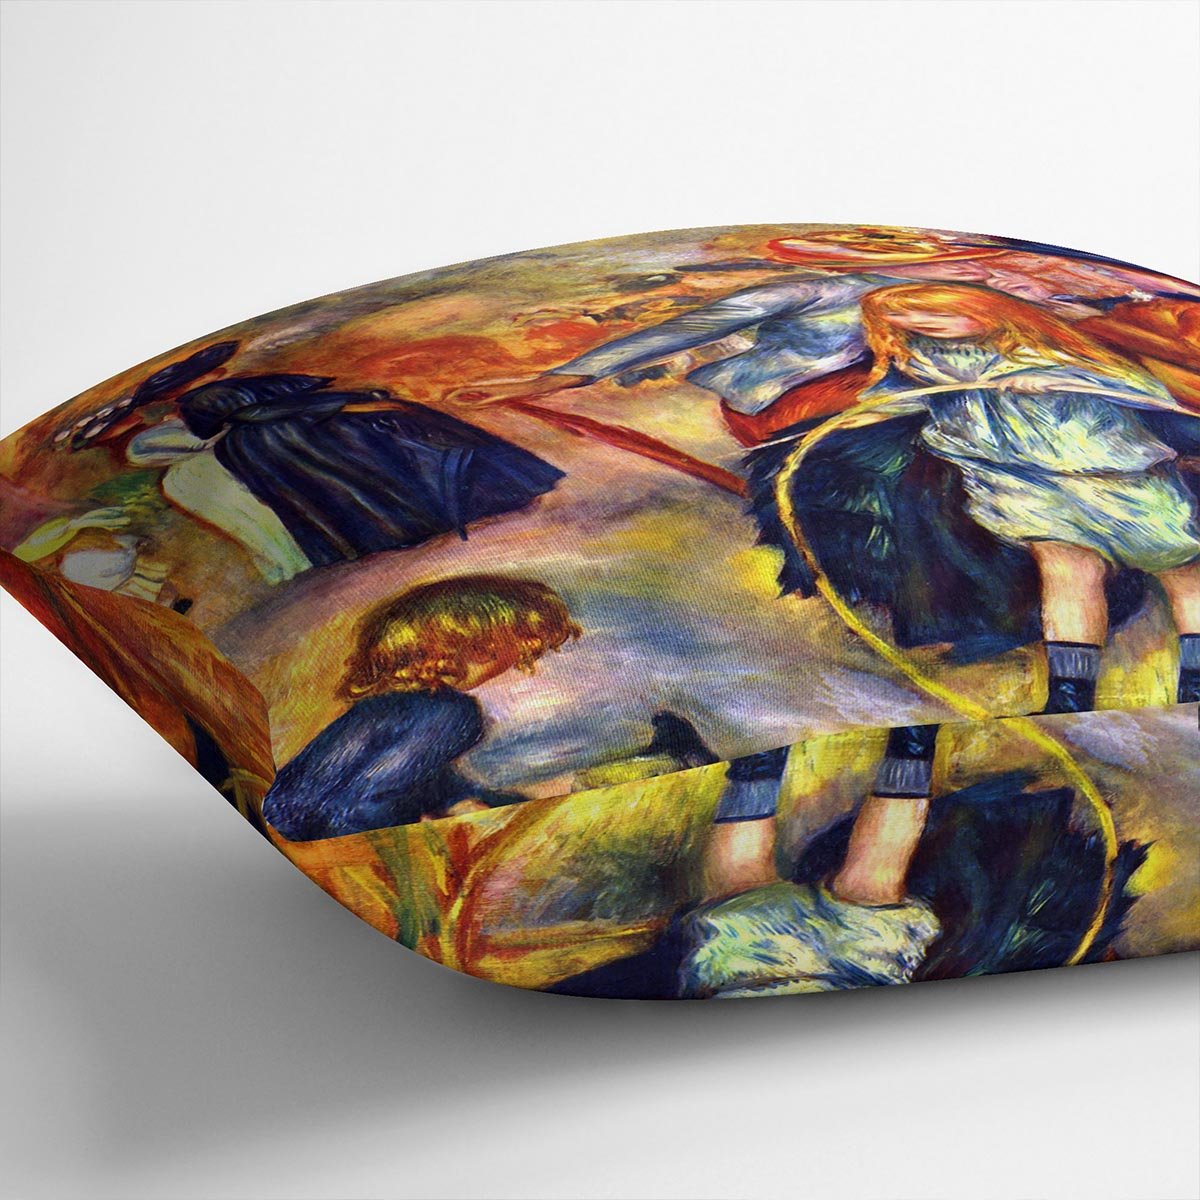 In the Jardin du Luxembourg by Renoir Throw Pillow